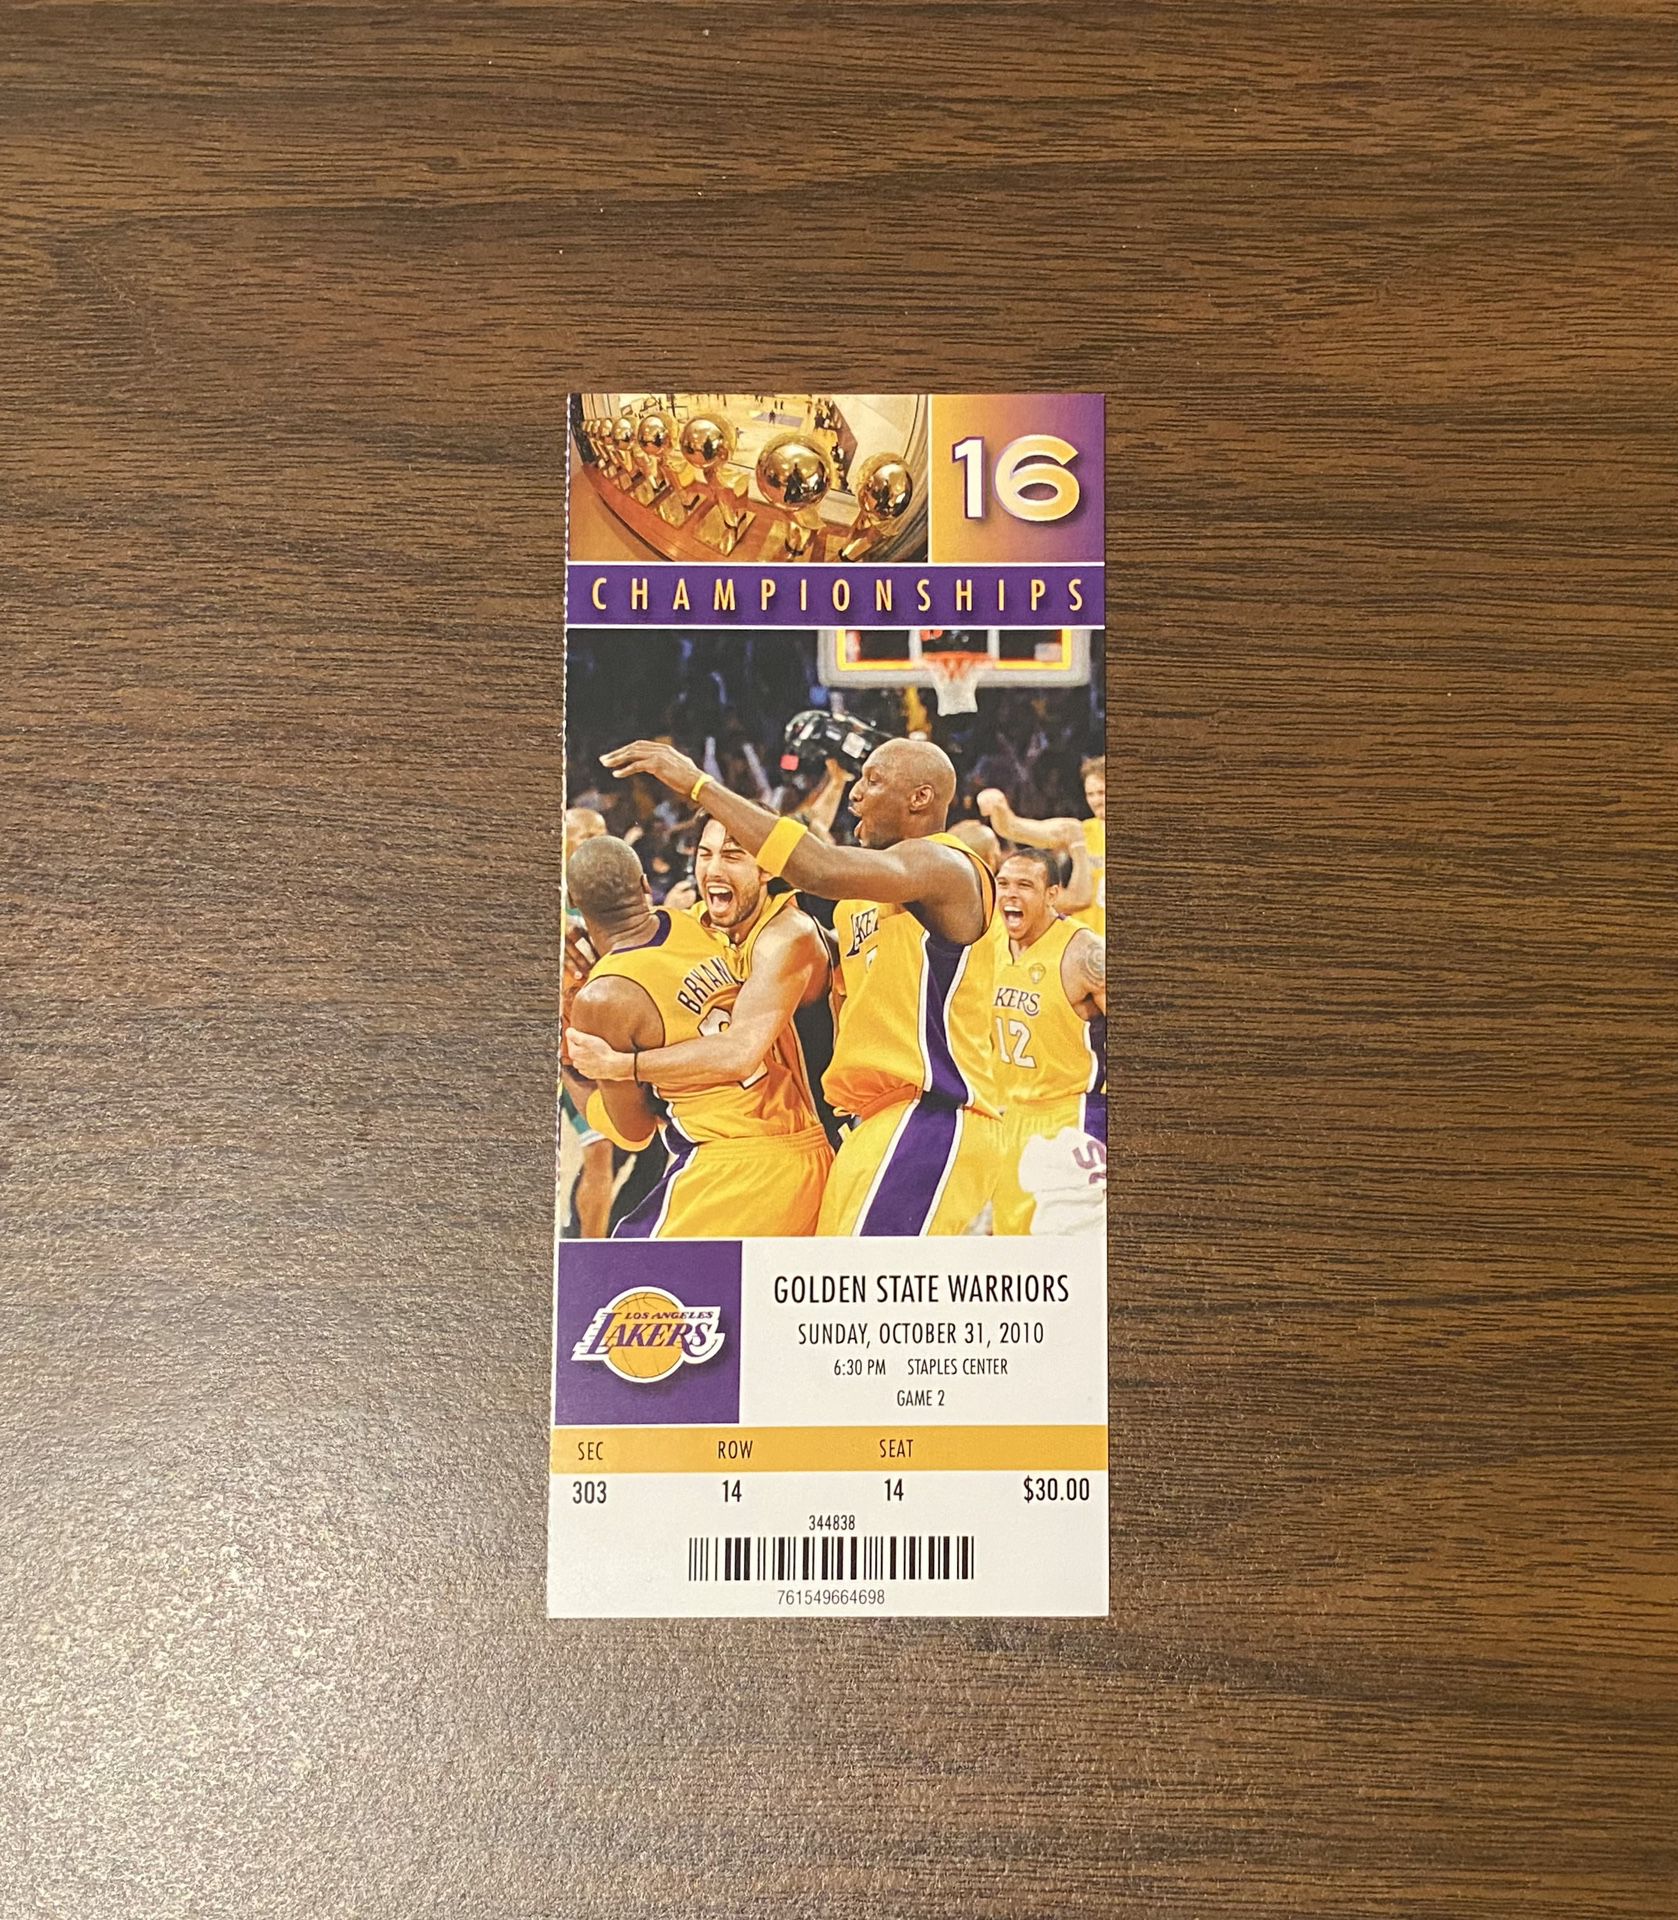 JEREMY LIN 1ST CAREER NBA POINT AUTHENTIC FULL GAME TICKET 10-31-2010 GOLDEN STATE WARRIORS vs LOS ANGELES LAKERS